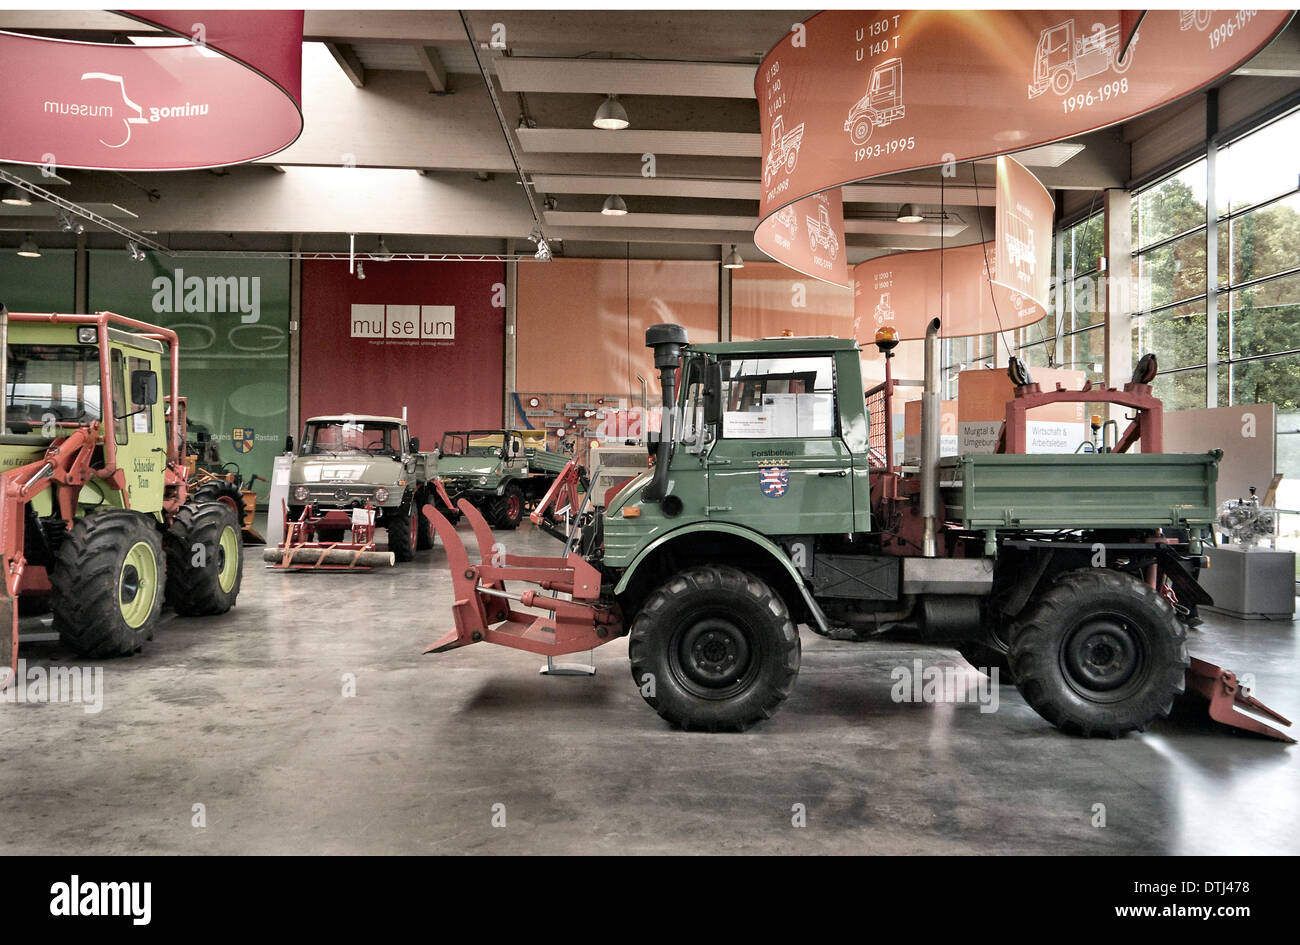 Unimog Museum Gaggenau Germany. A row of early model Umimog AWD vehicles with snow moving equipment fitted Stock Photo